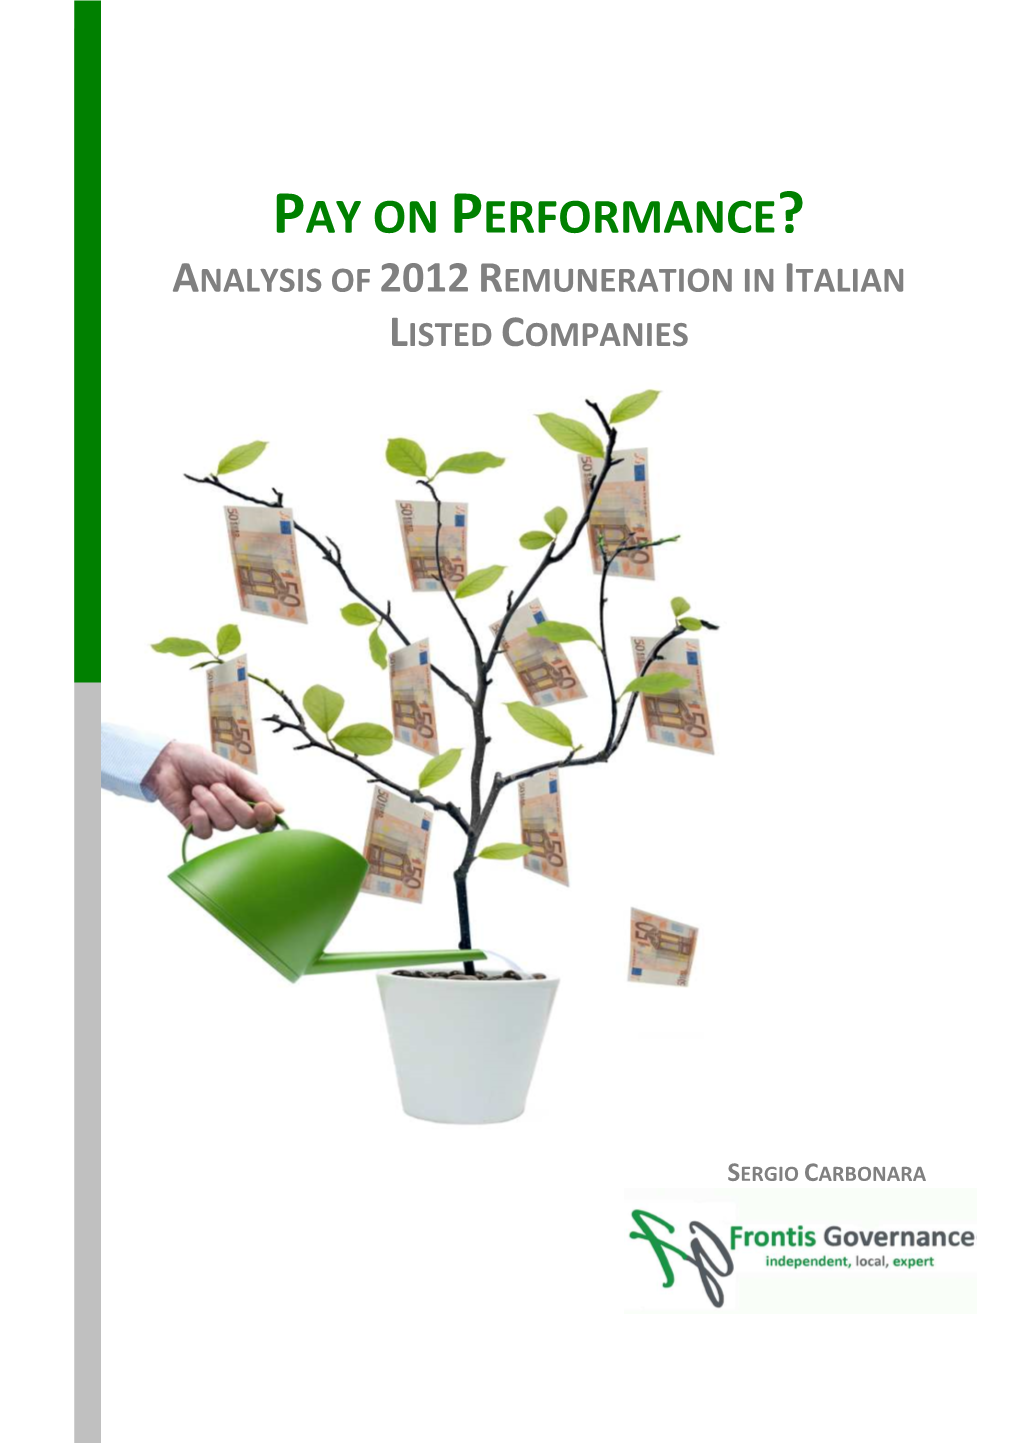 Pay on Performance? Analysis of 2012 Remuneration in Italian